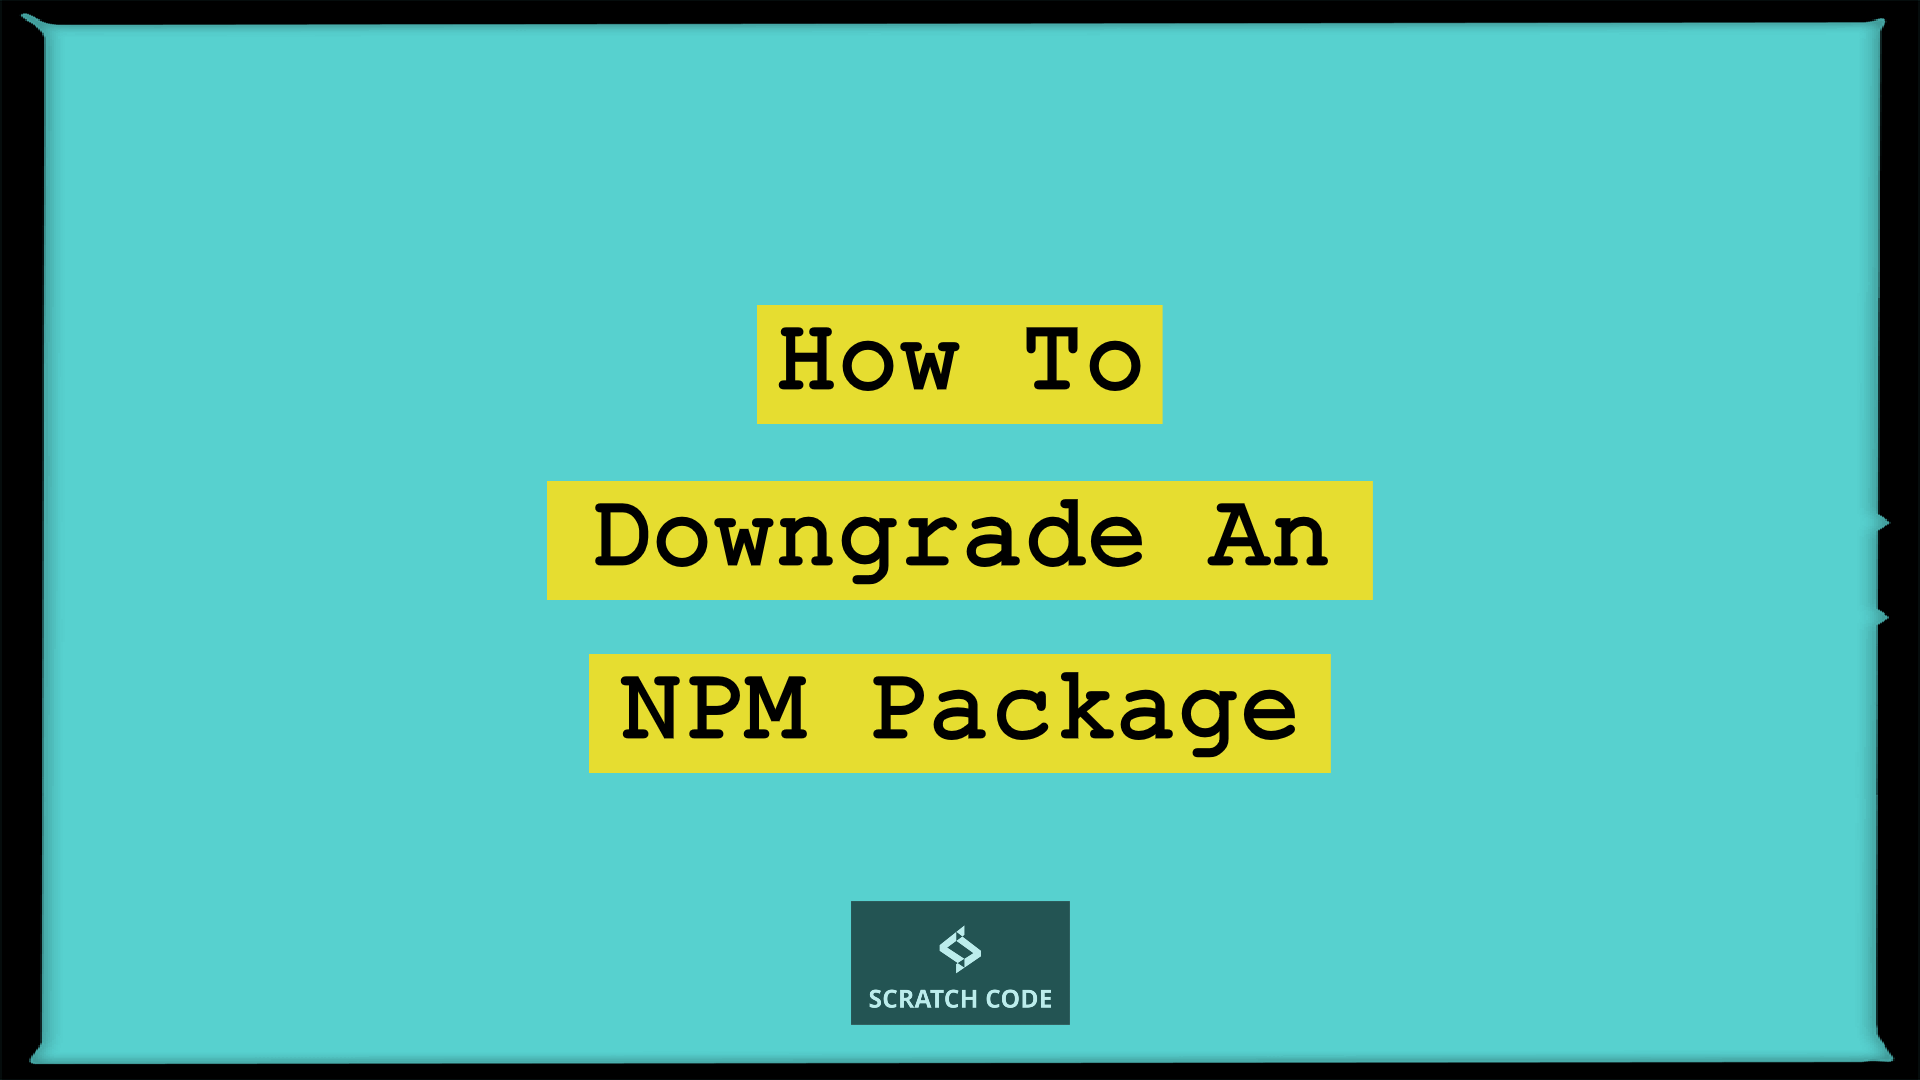 How To Downgrade An NPM Package